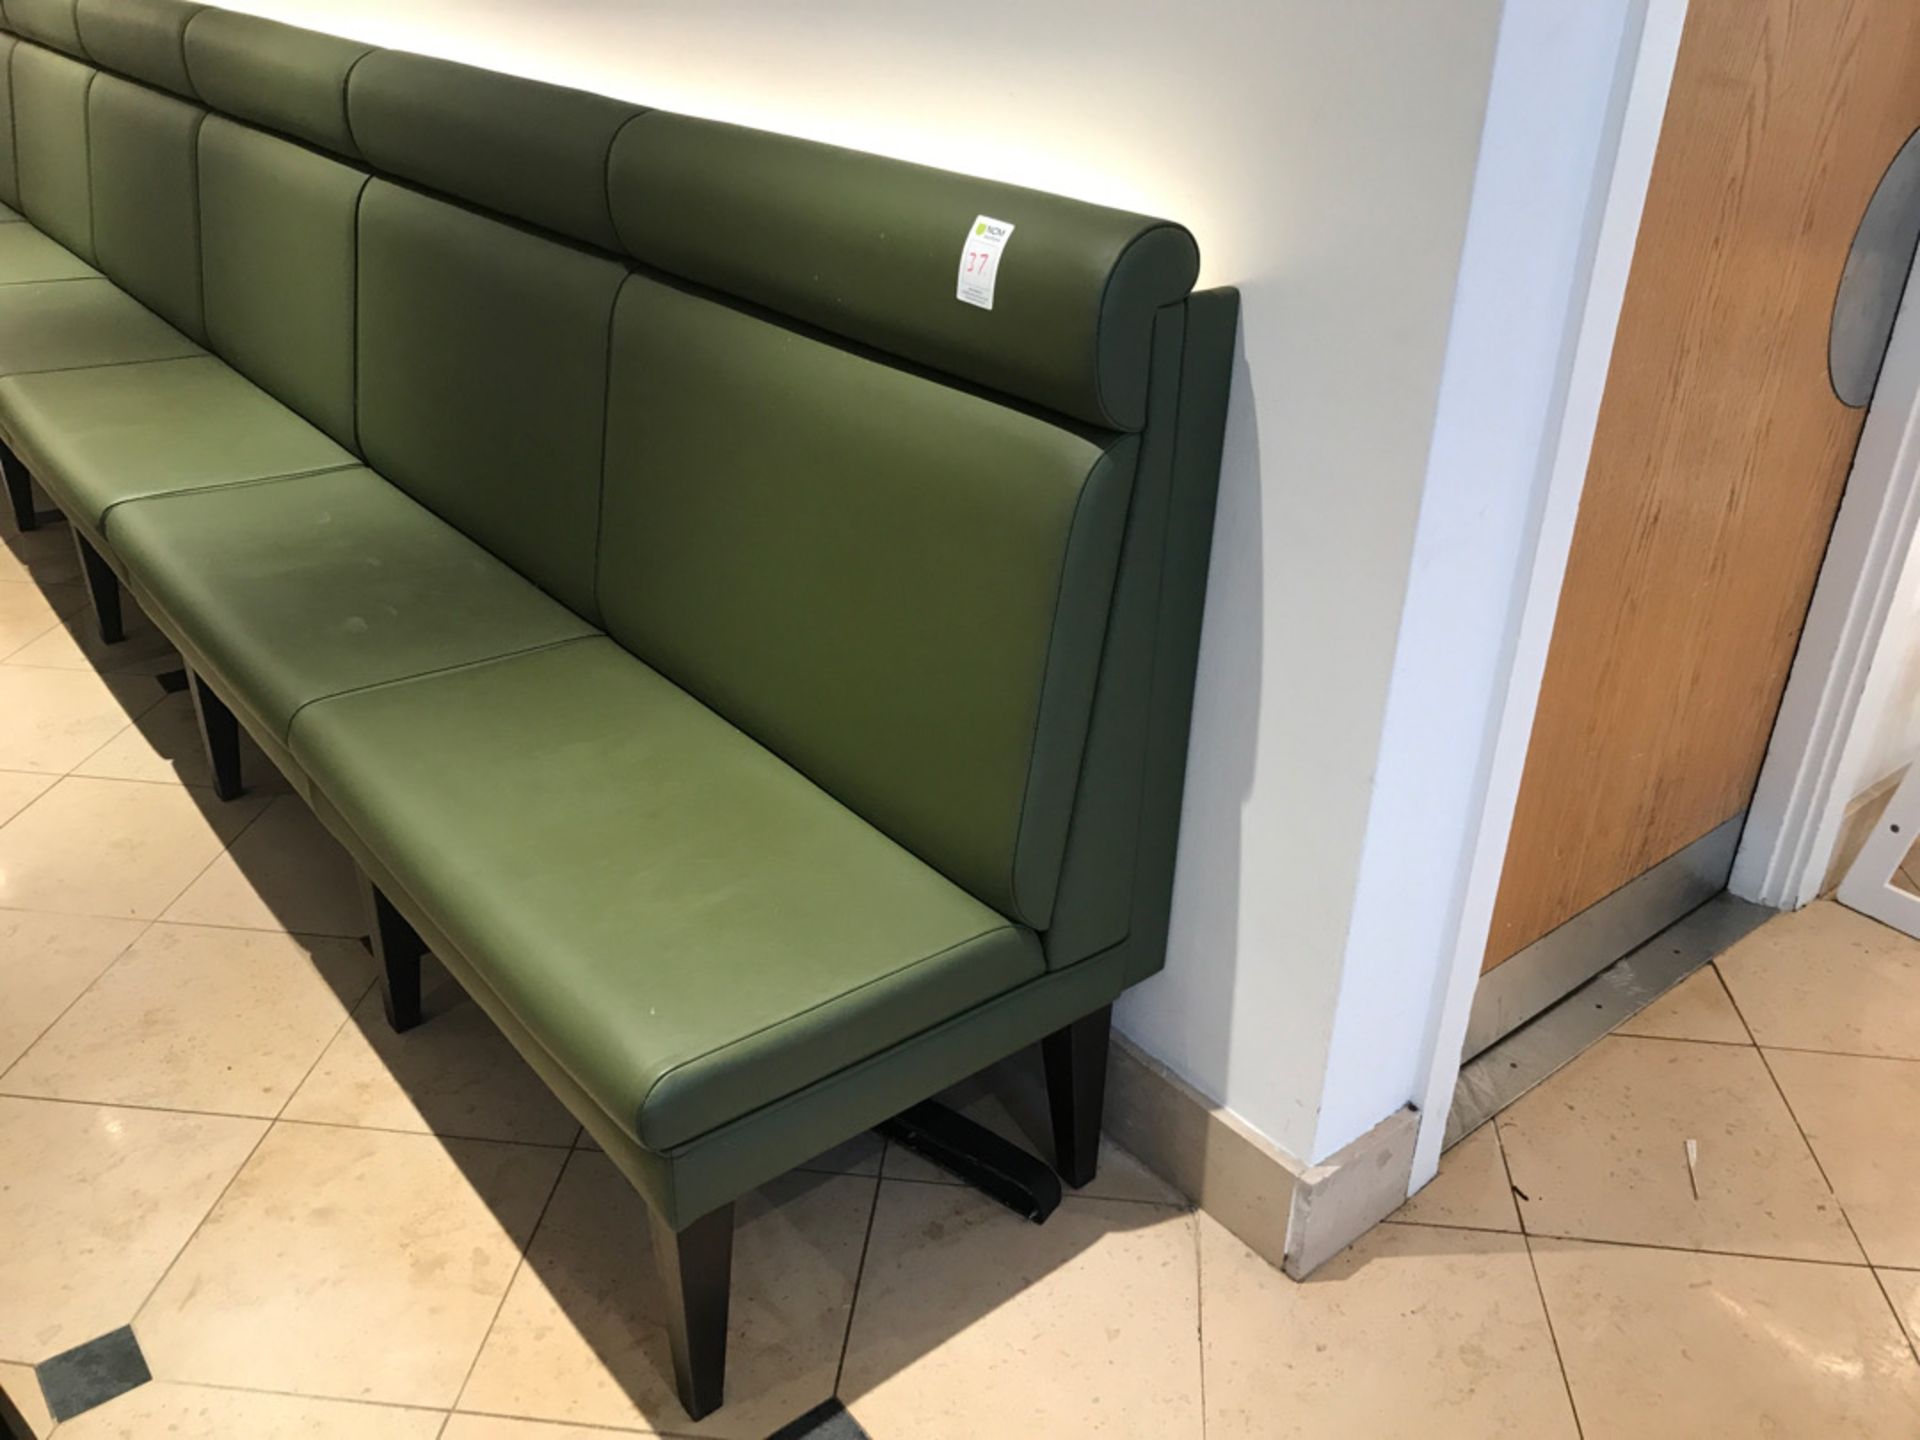 Banquette Large green bench seating - Image 3 of 3